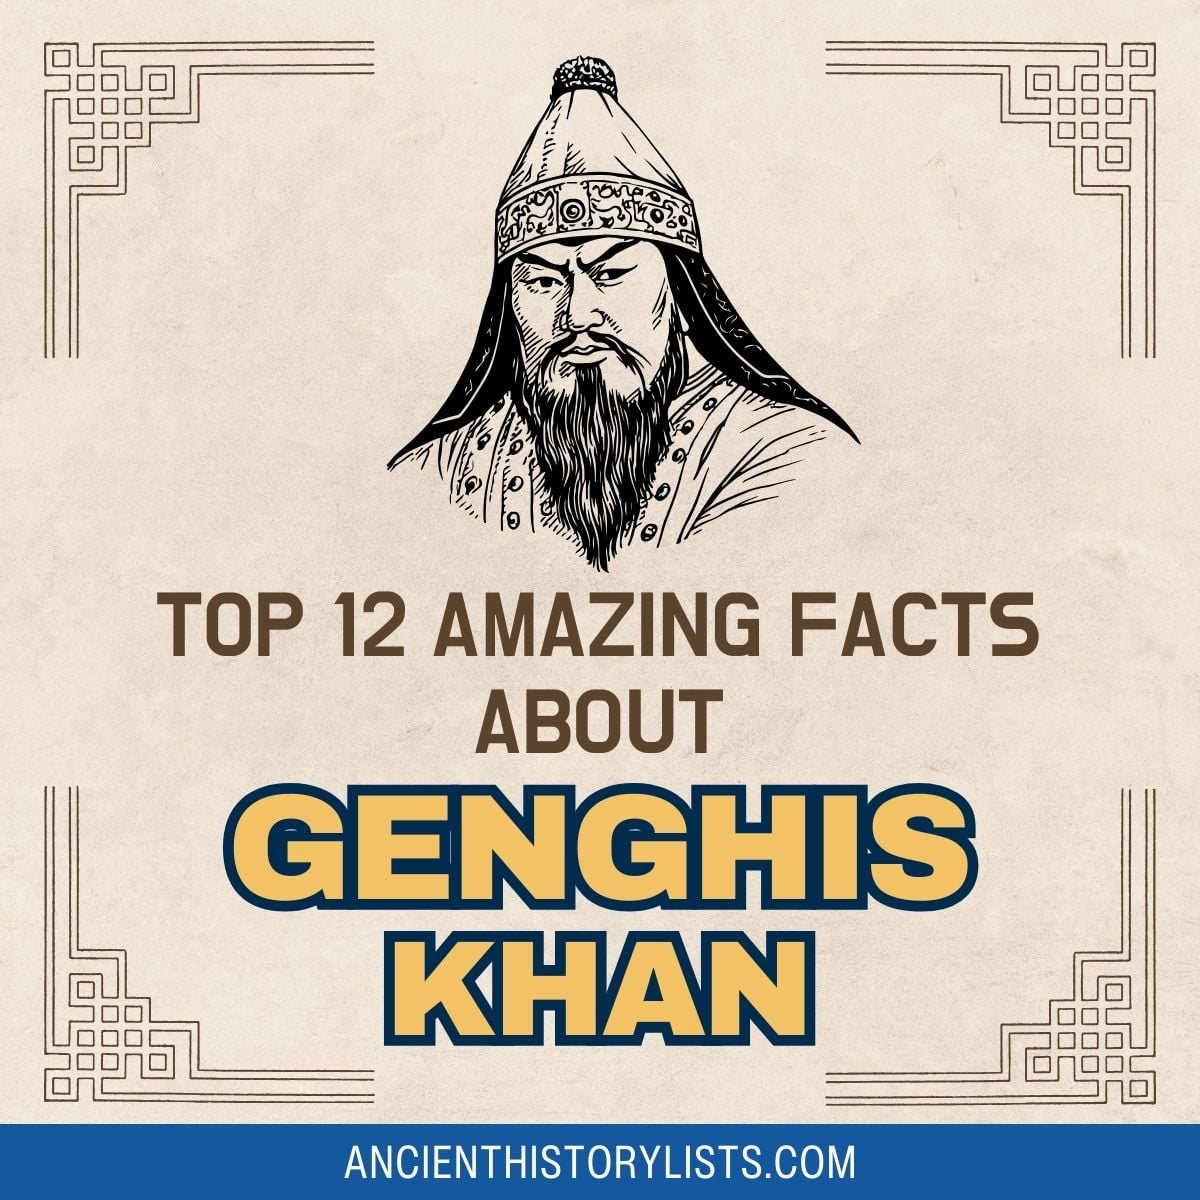 Facts about Genghis Khan